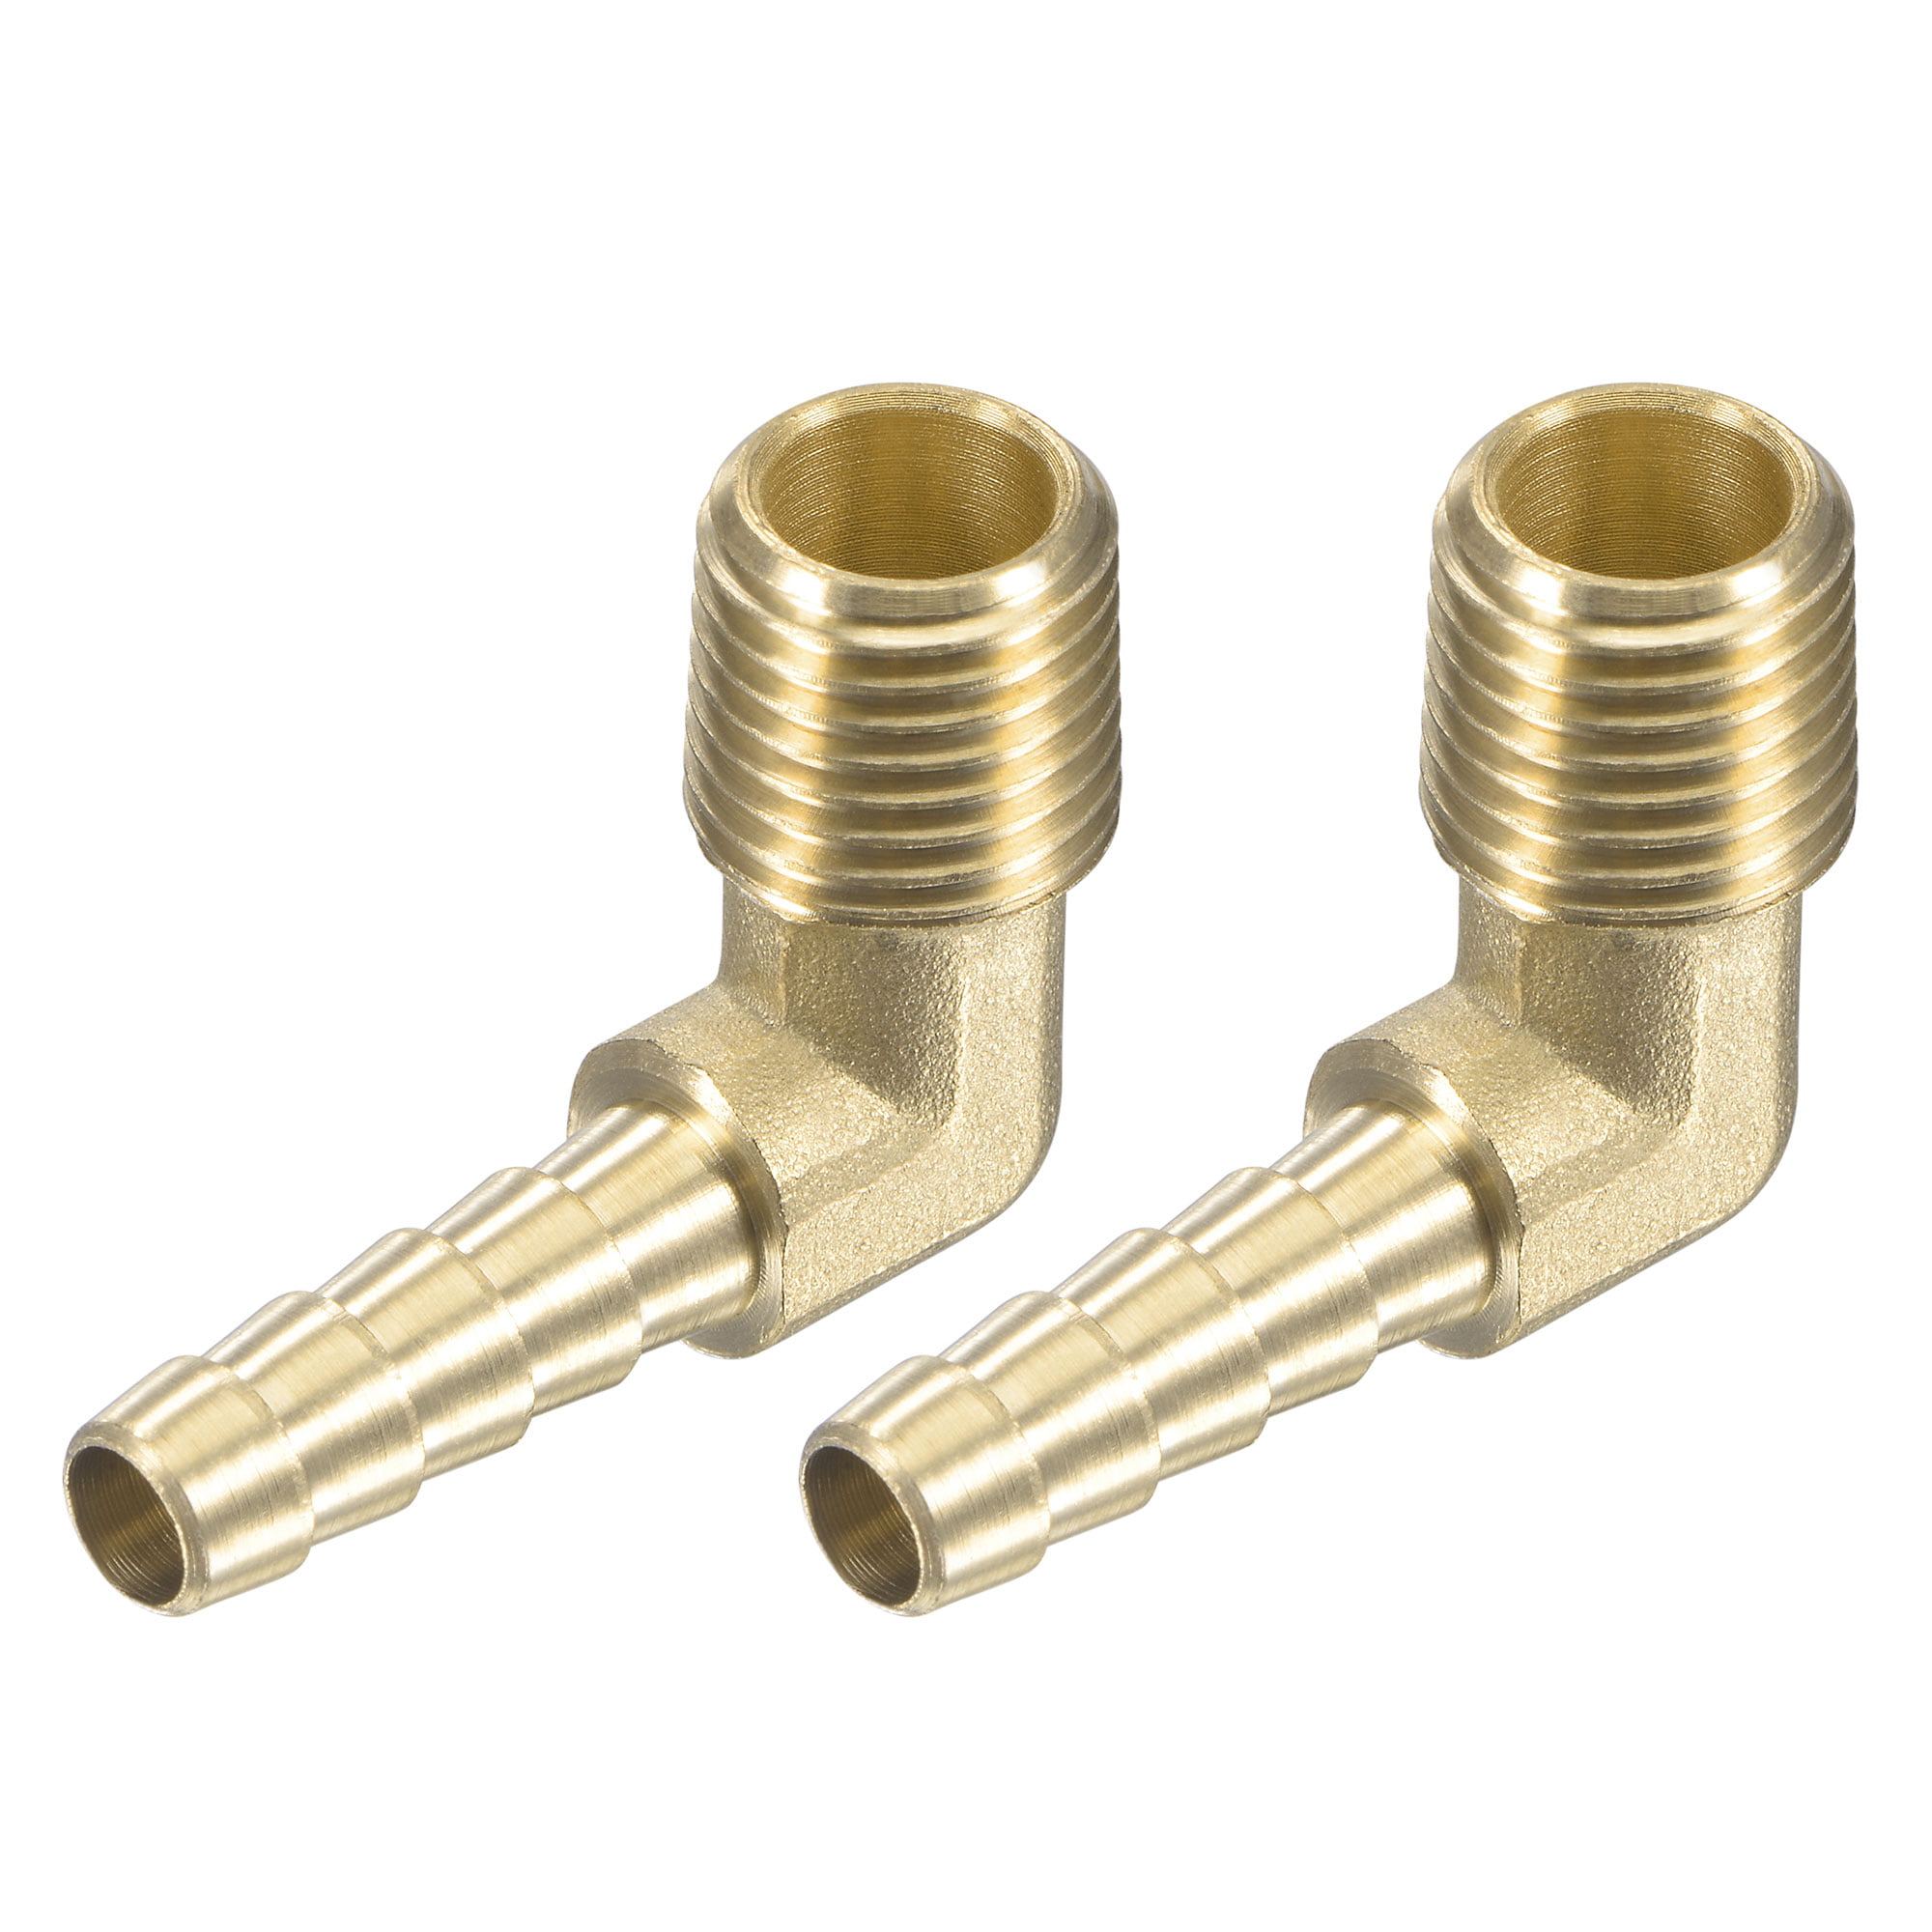 Elbow BSP Brass Female Thread Fitting x Barb Hose Tail Connector 1/4" 3/8" 1/2" 